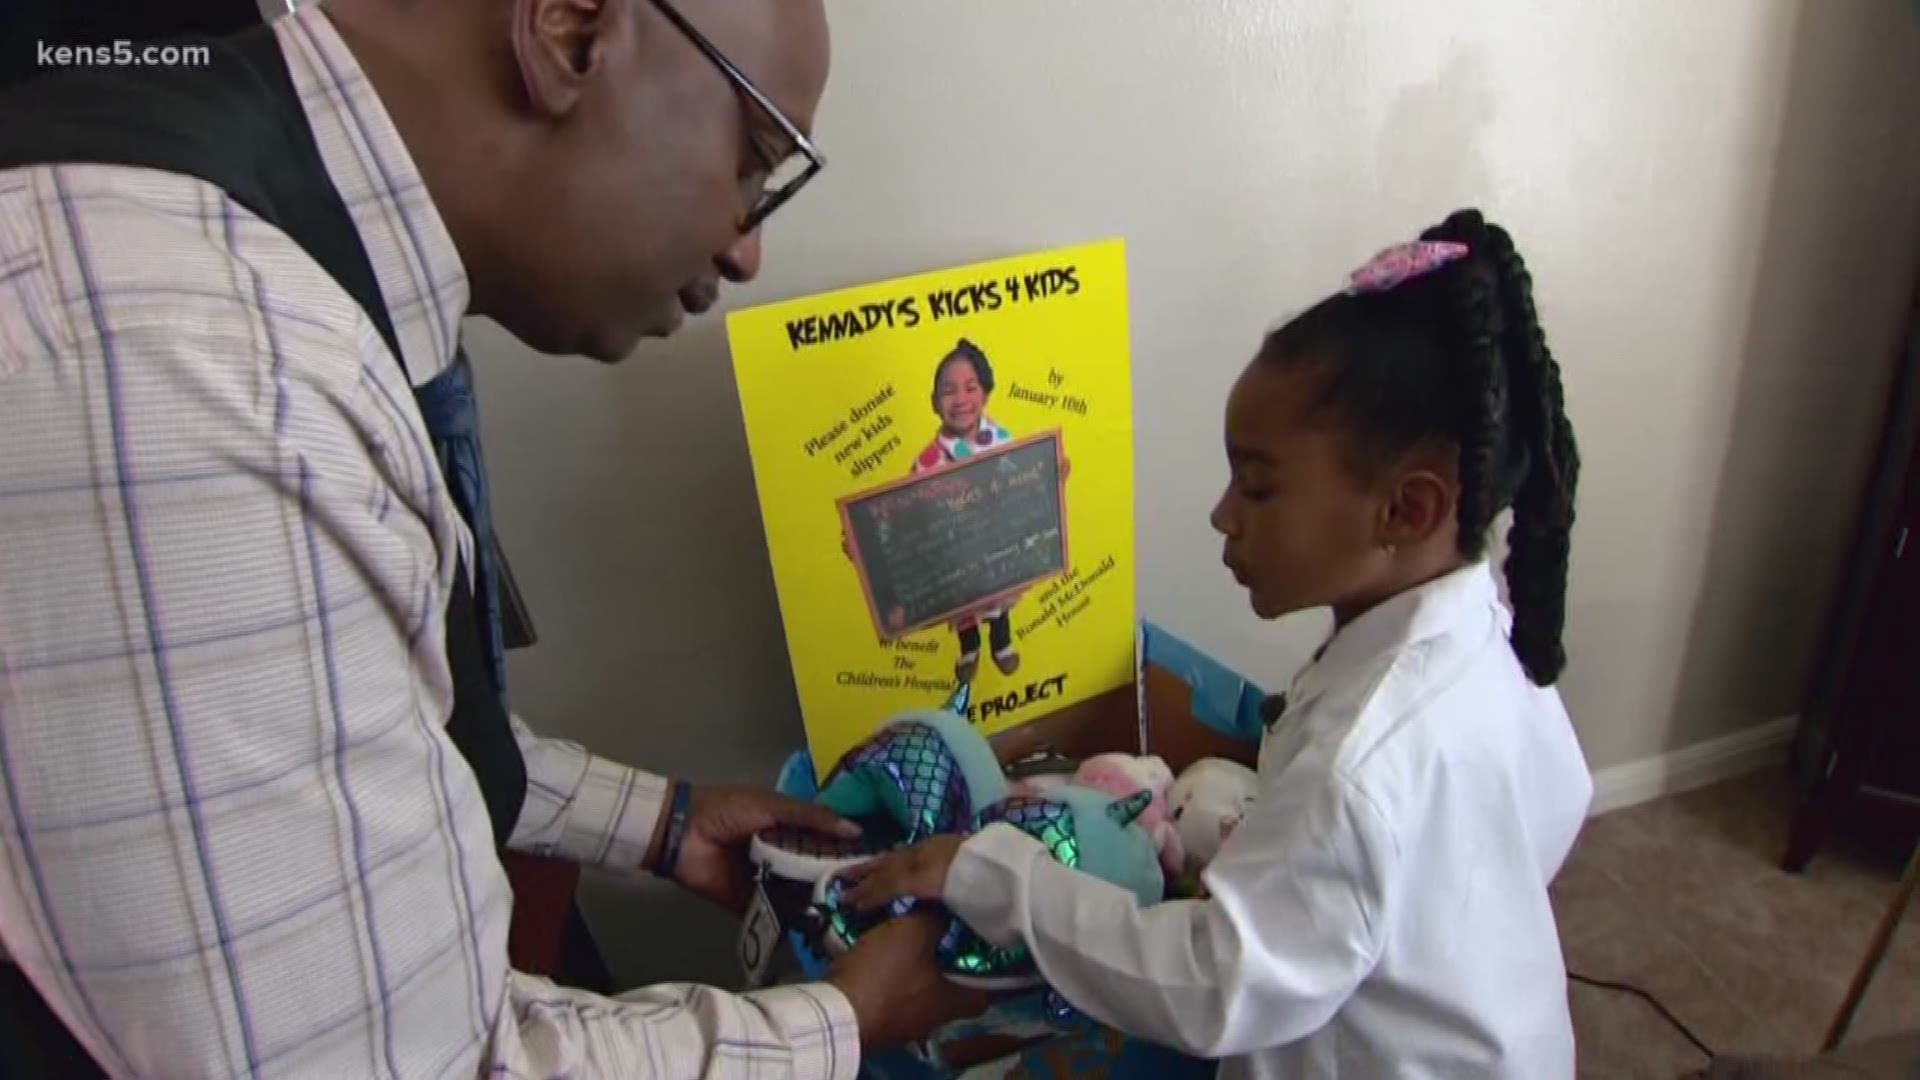 In this week's "Kids Who Make SA Great," we meet Kennady Franklin, a six-year-old who wants to make hospital stays for kids more comfortable.